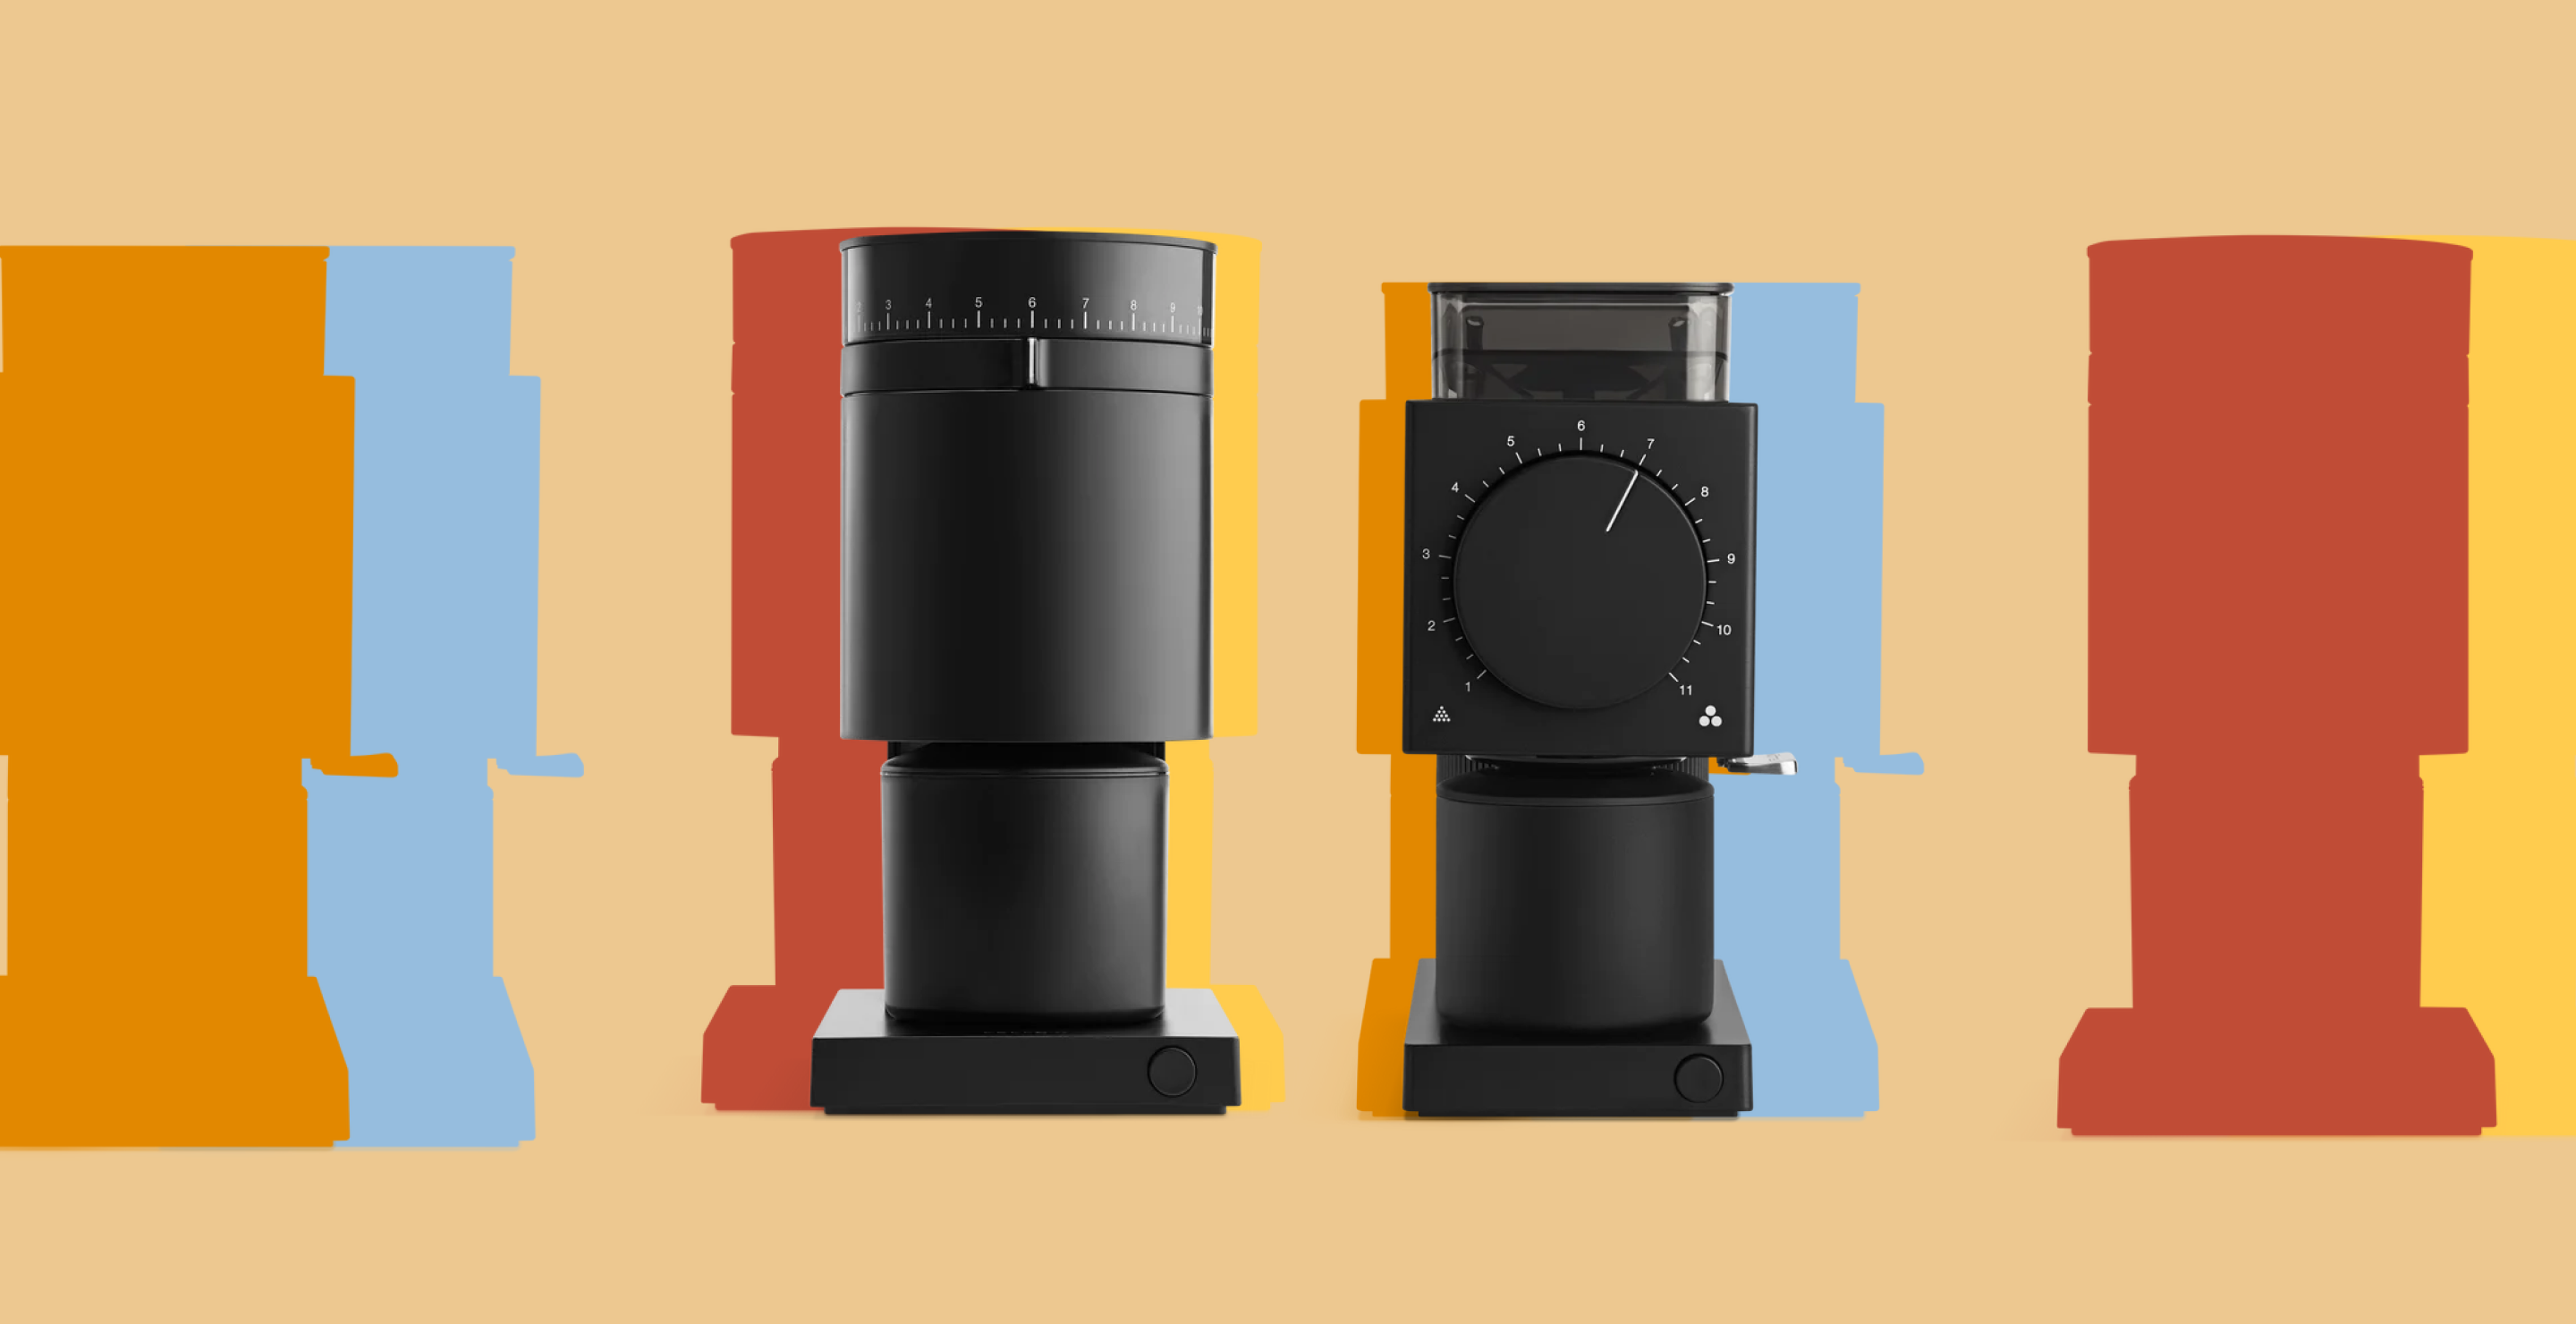 What to Look for in a Coffee Grinder: Top Features Explained